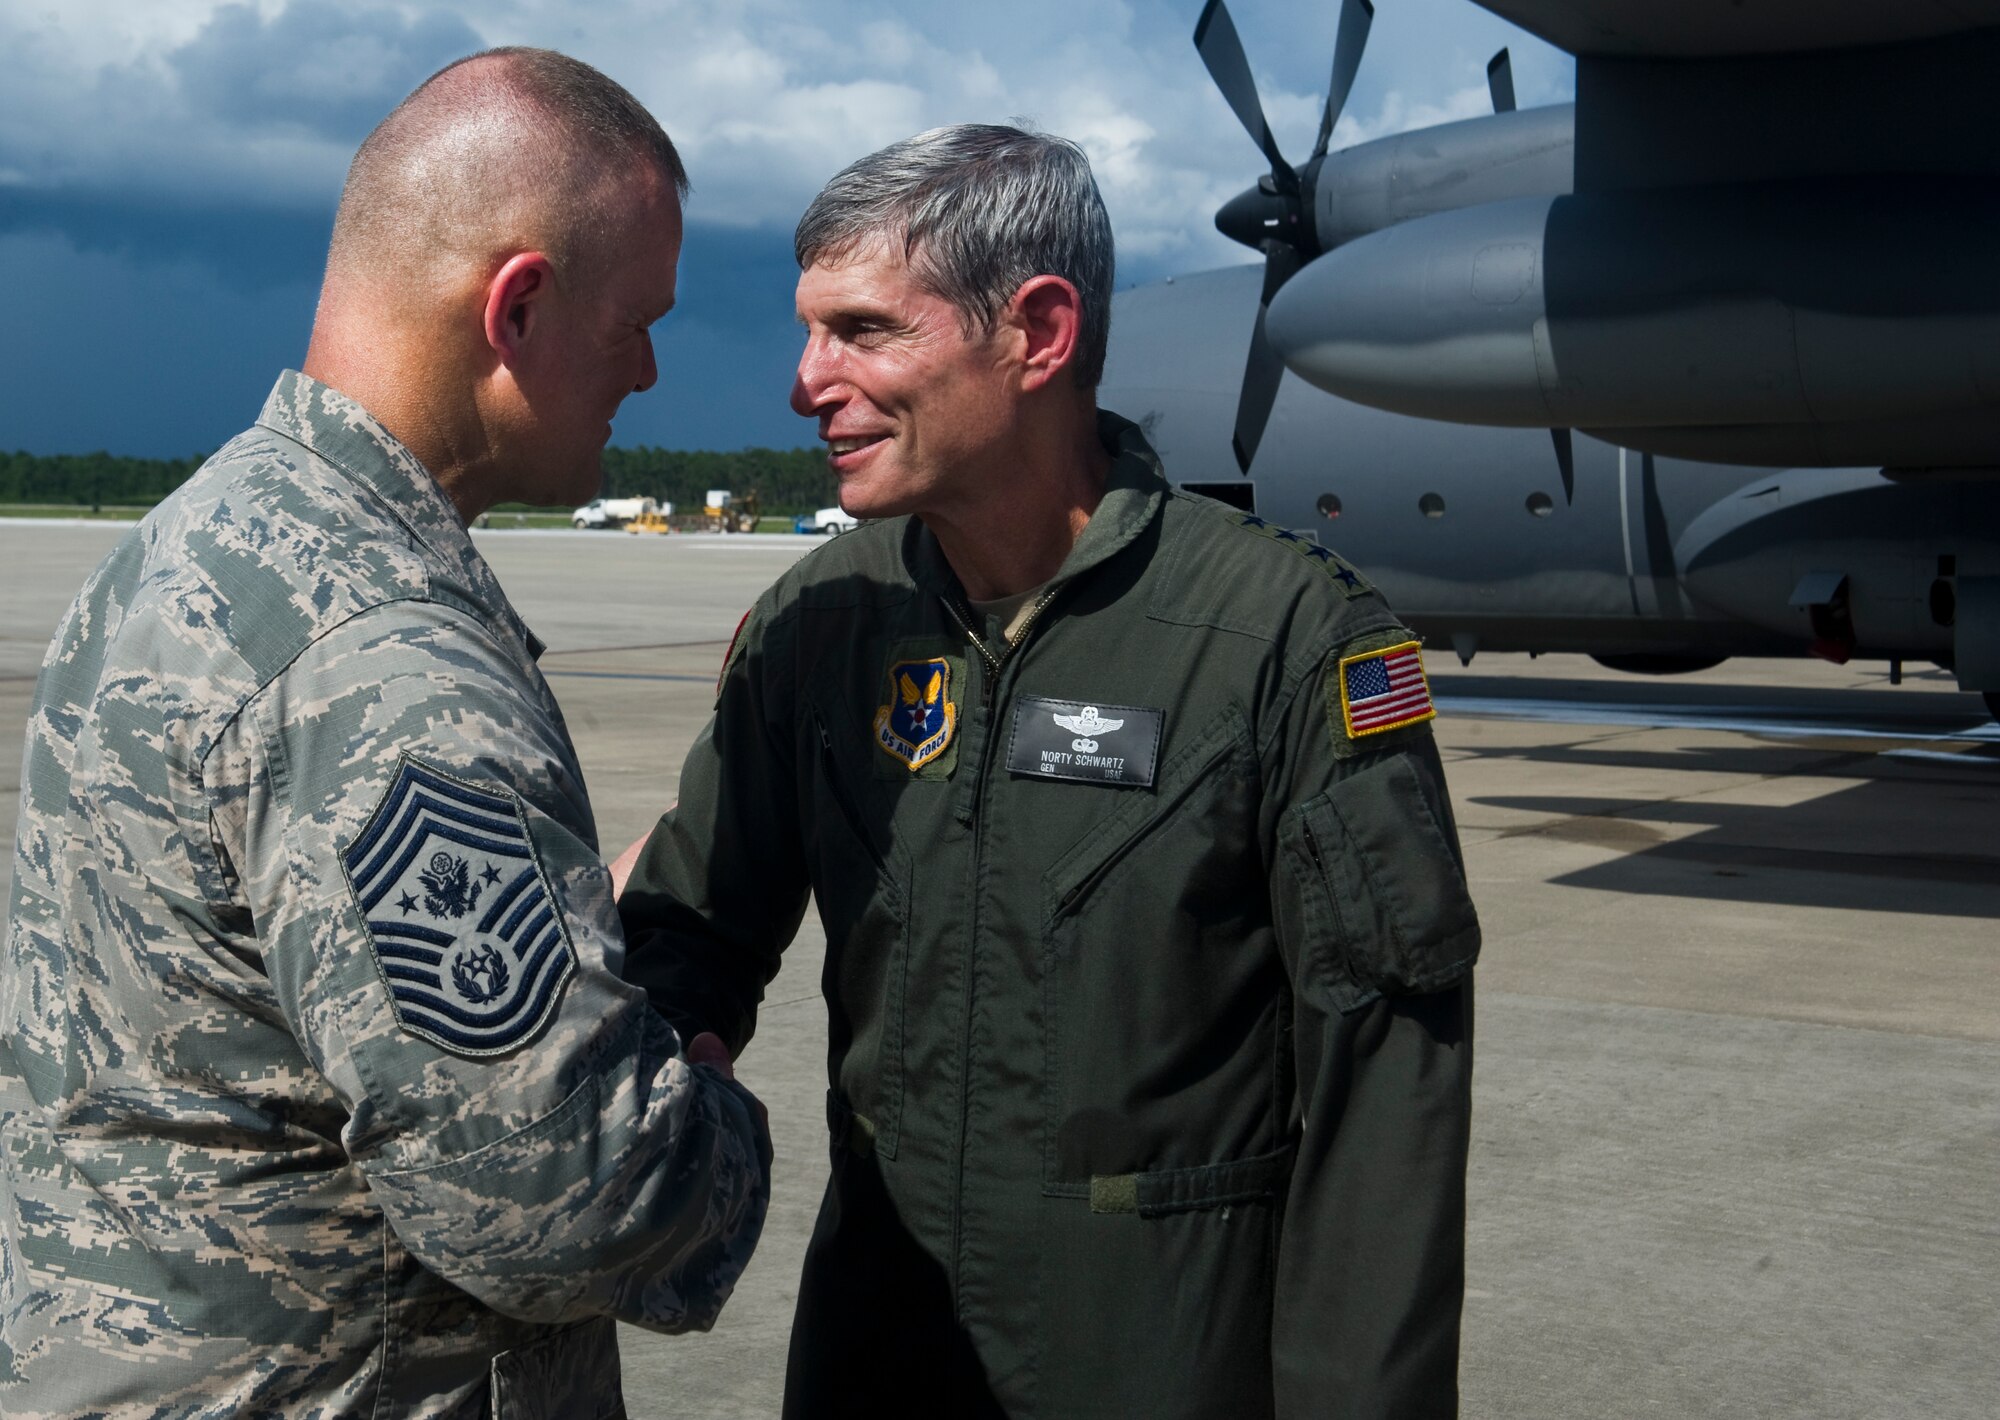 Air Force Chief of Staff Gen. Norton Schwartz shakes hands with Chief Master Sgt. of the Air Force James Roy, July 12, 2012, at Hurlburt Field, Fla., following his last flight as an active-duty officer on an MC-130E Combat Talon I. The MC-130E Combat Talon I crew conducted a local training sortie during the mission. It also served as Schwartz's "fini flight" in the Air Force. (U.S. Air Force photo / Airman 1st Class Christopher Williams) (Released)